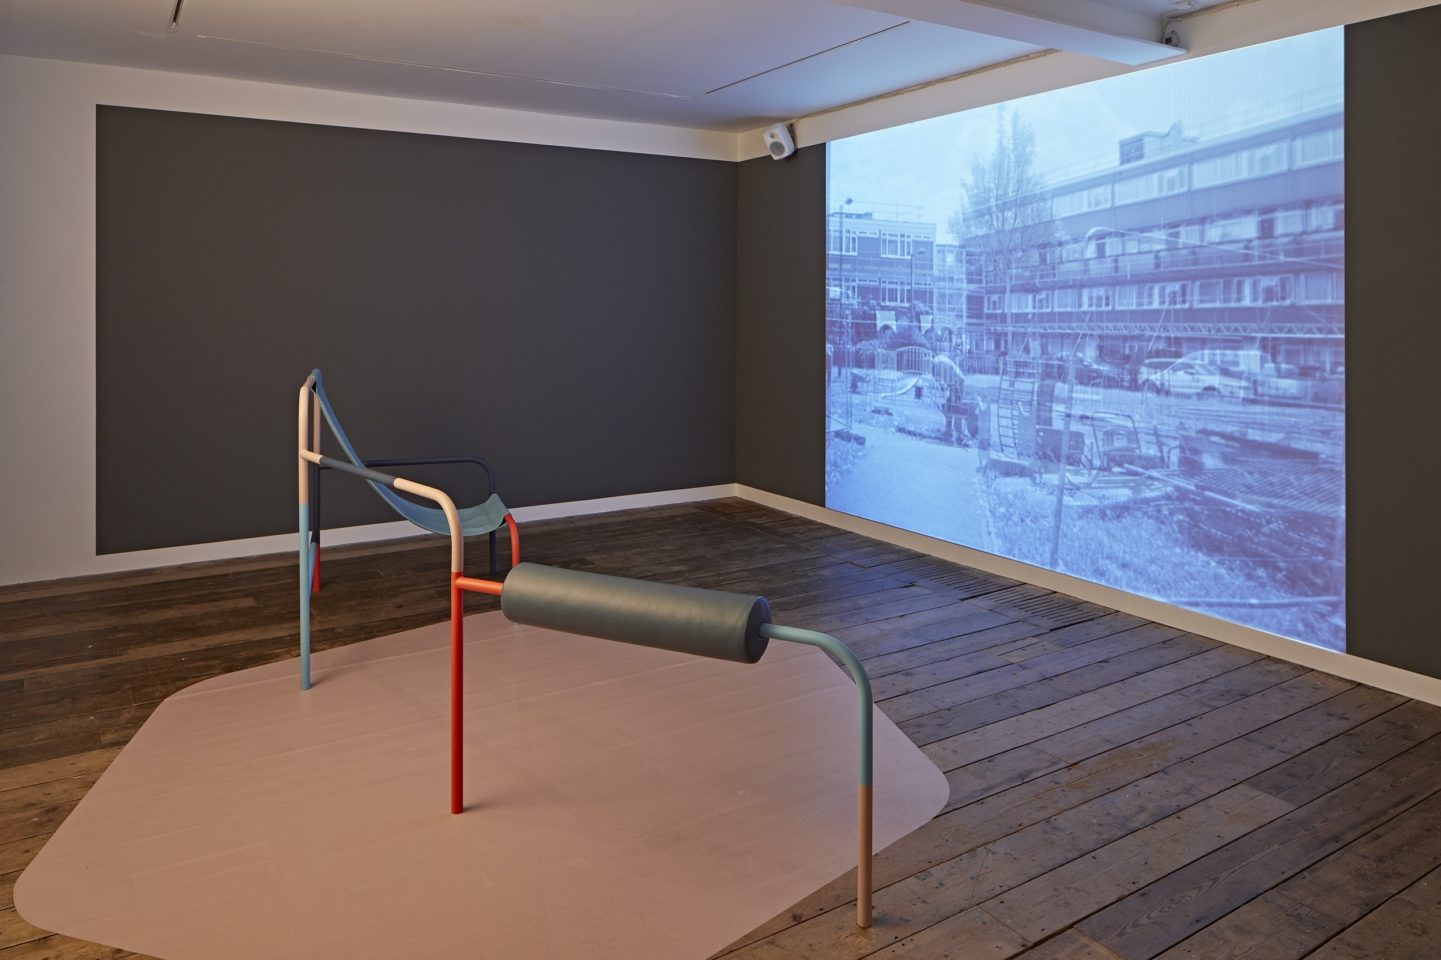 An image of a dark gallery space with a playground structure in the centre of a room facing a screen. The screen is showing a film of a housing estate.